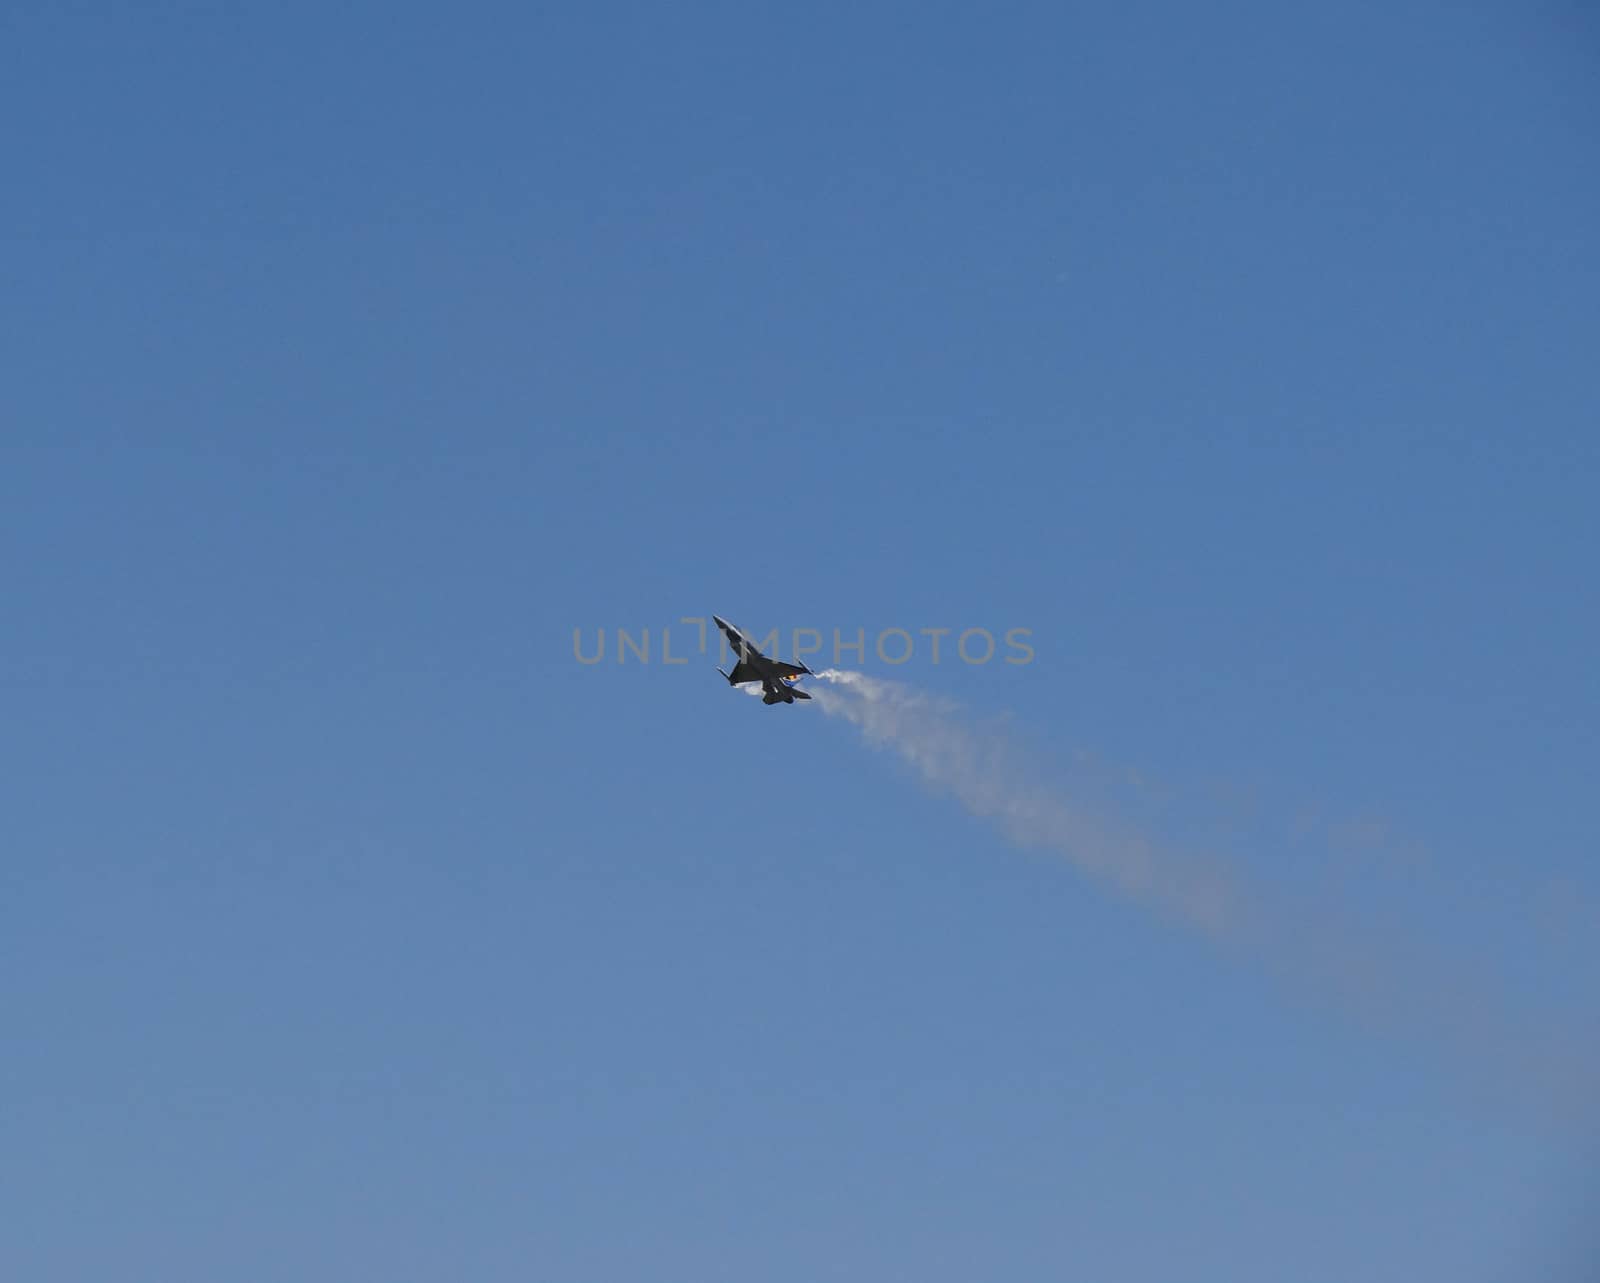 belgian f16 at an airshow in france